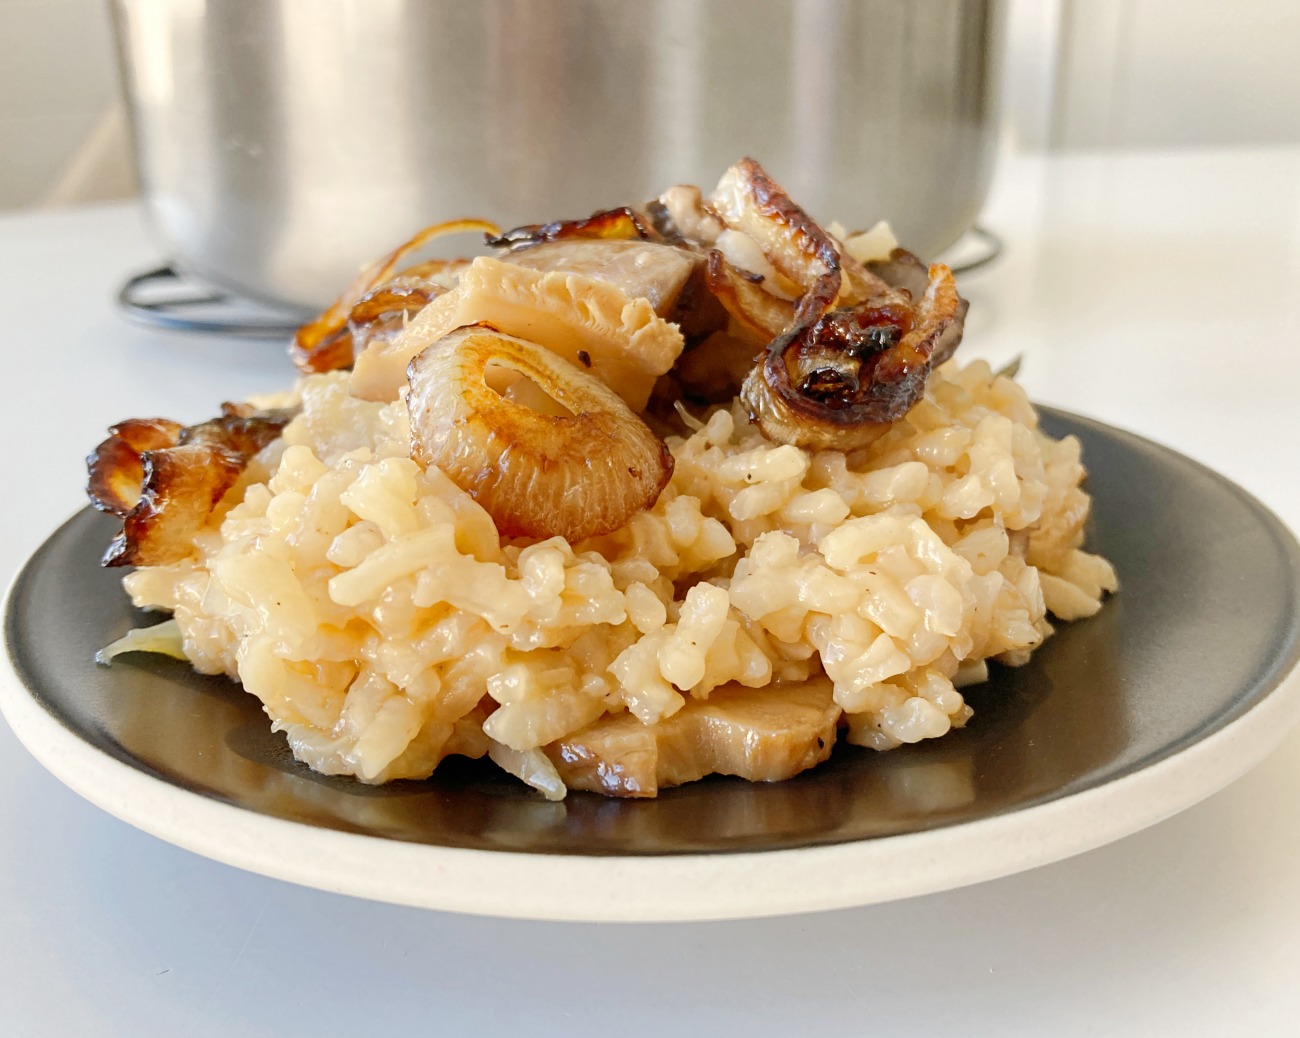 Caramelized Onion and Mushroom Oven Risotto